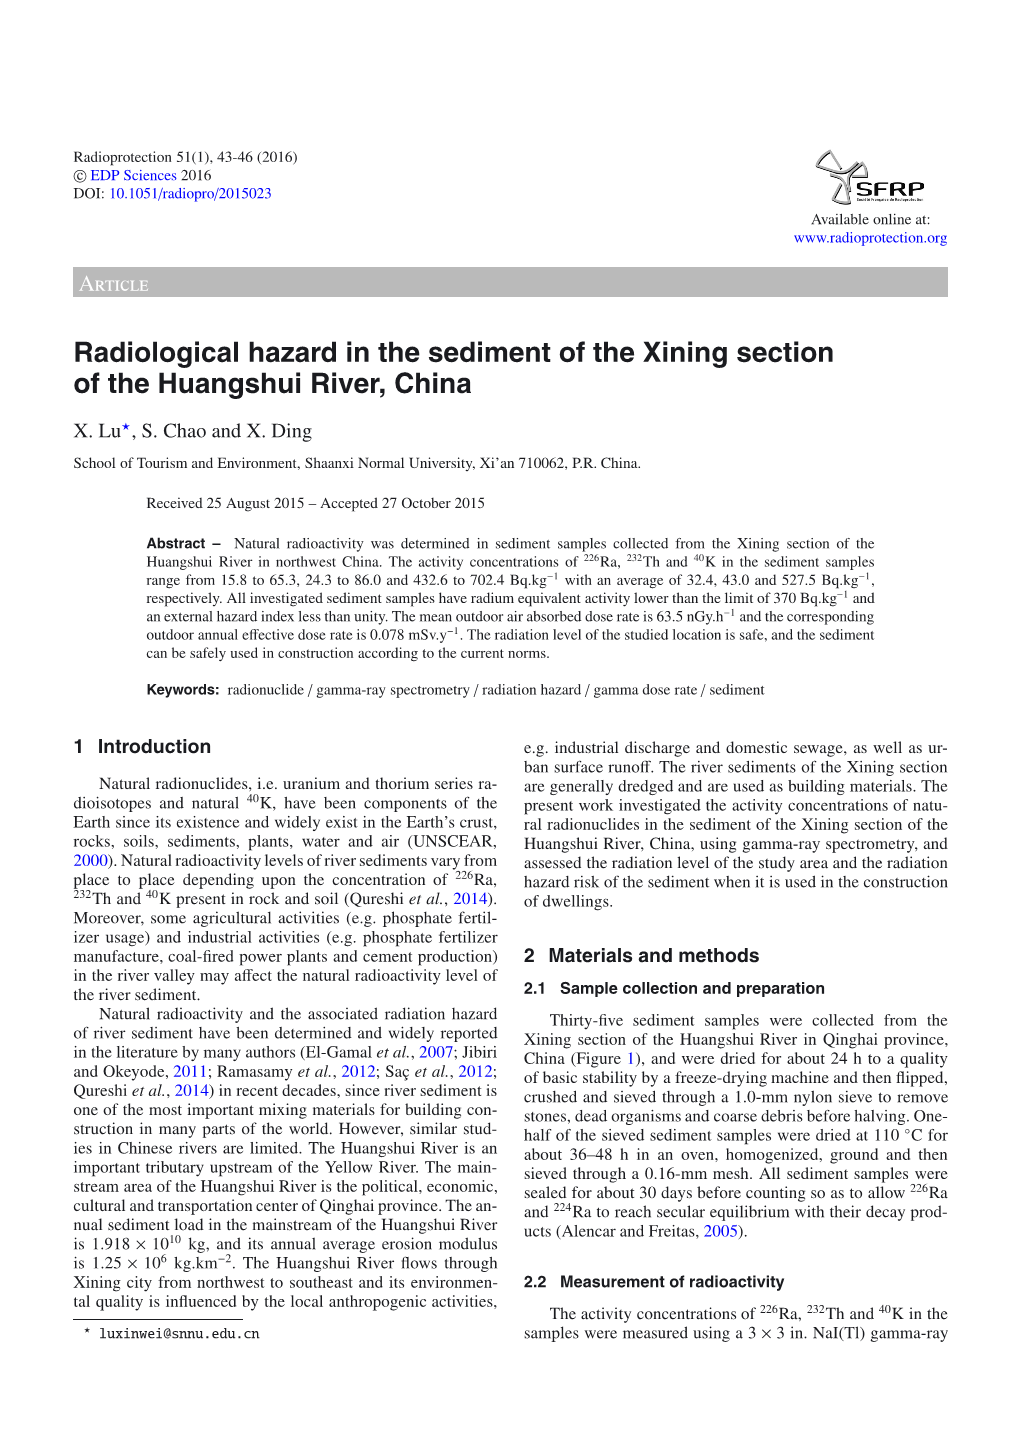 Radiological Hazard in the Sediment of the Xining Section of the Huangshui River, China